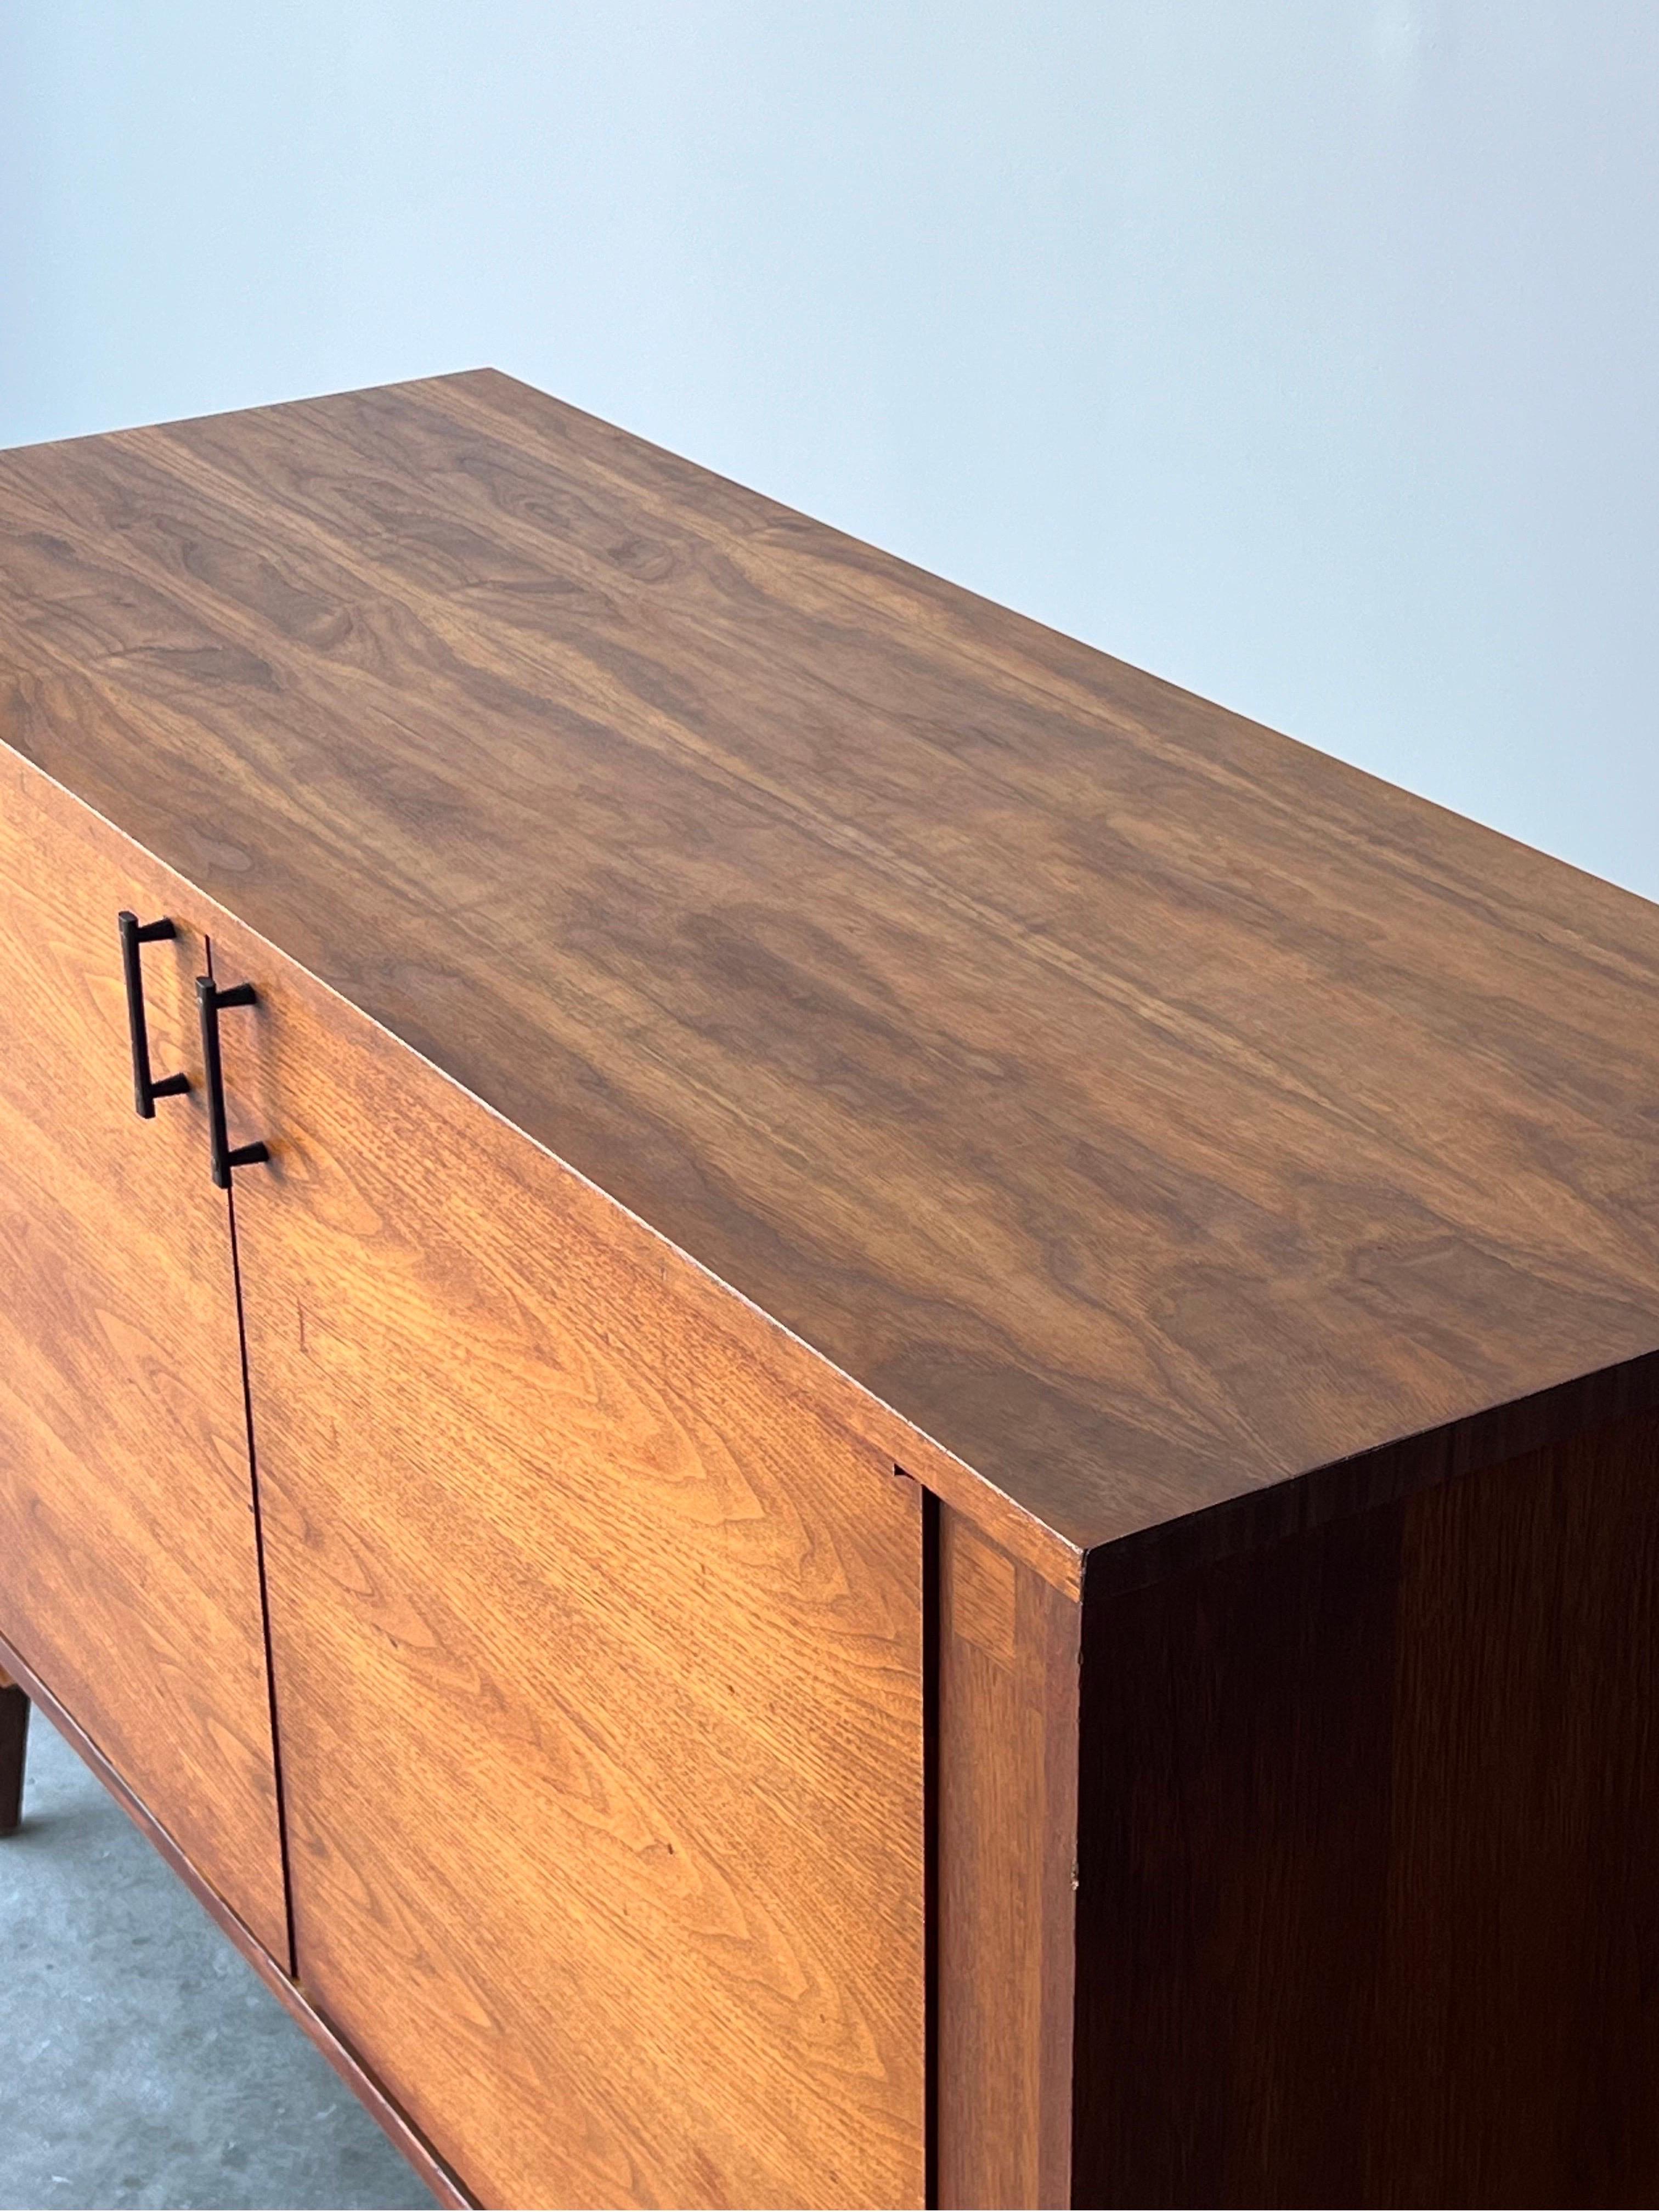 If you’re looking for a credenza rich in details then look no further. Mid-century walnut credenza with rosewood accents. Made by Kroehler circa 1960’s. This sideboard is the perfect media console or dining room item. Nice rosewood handles and